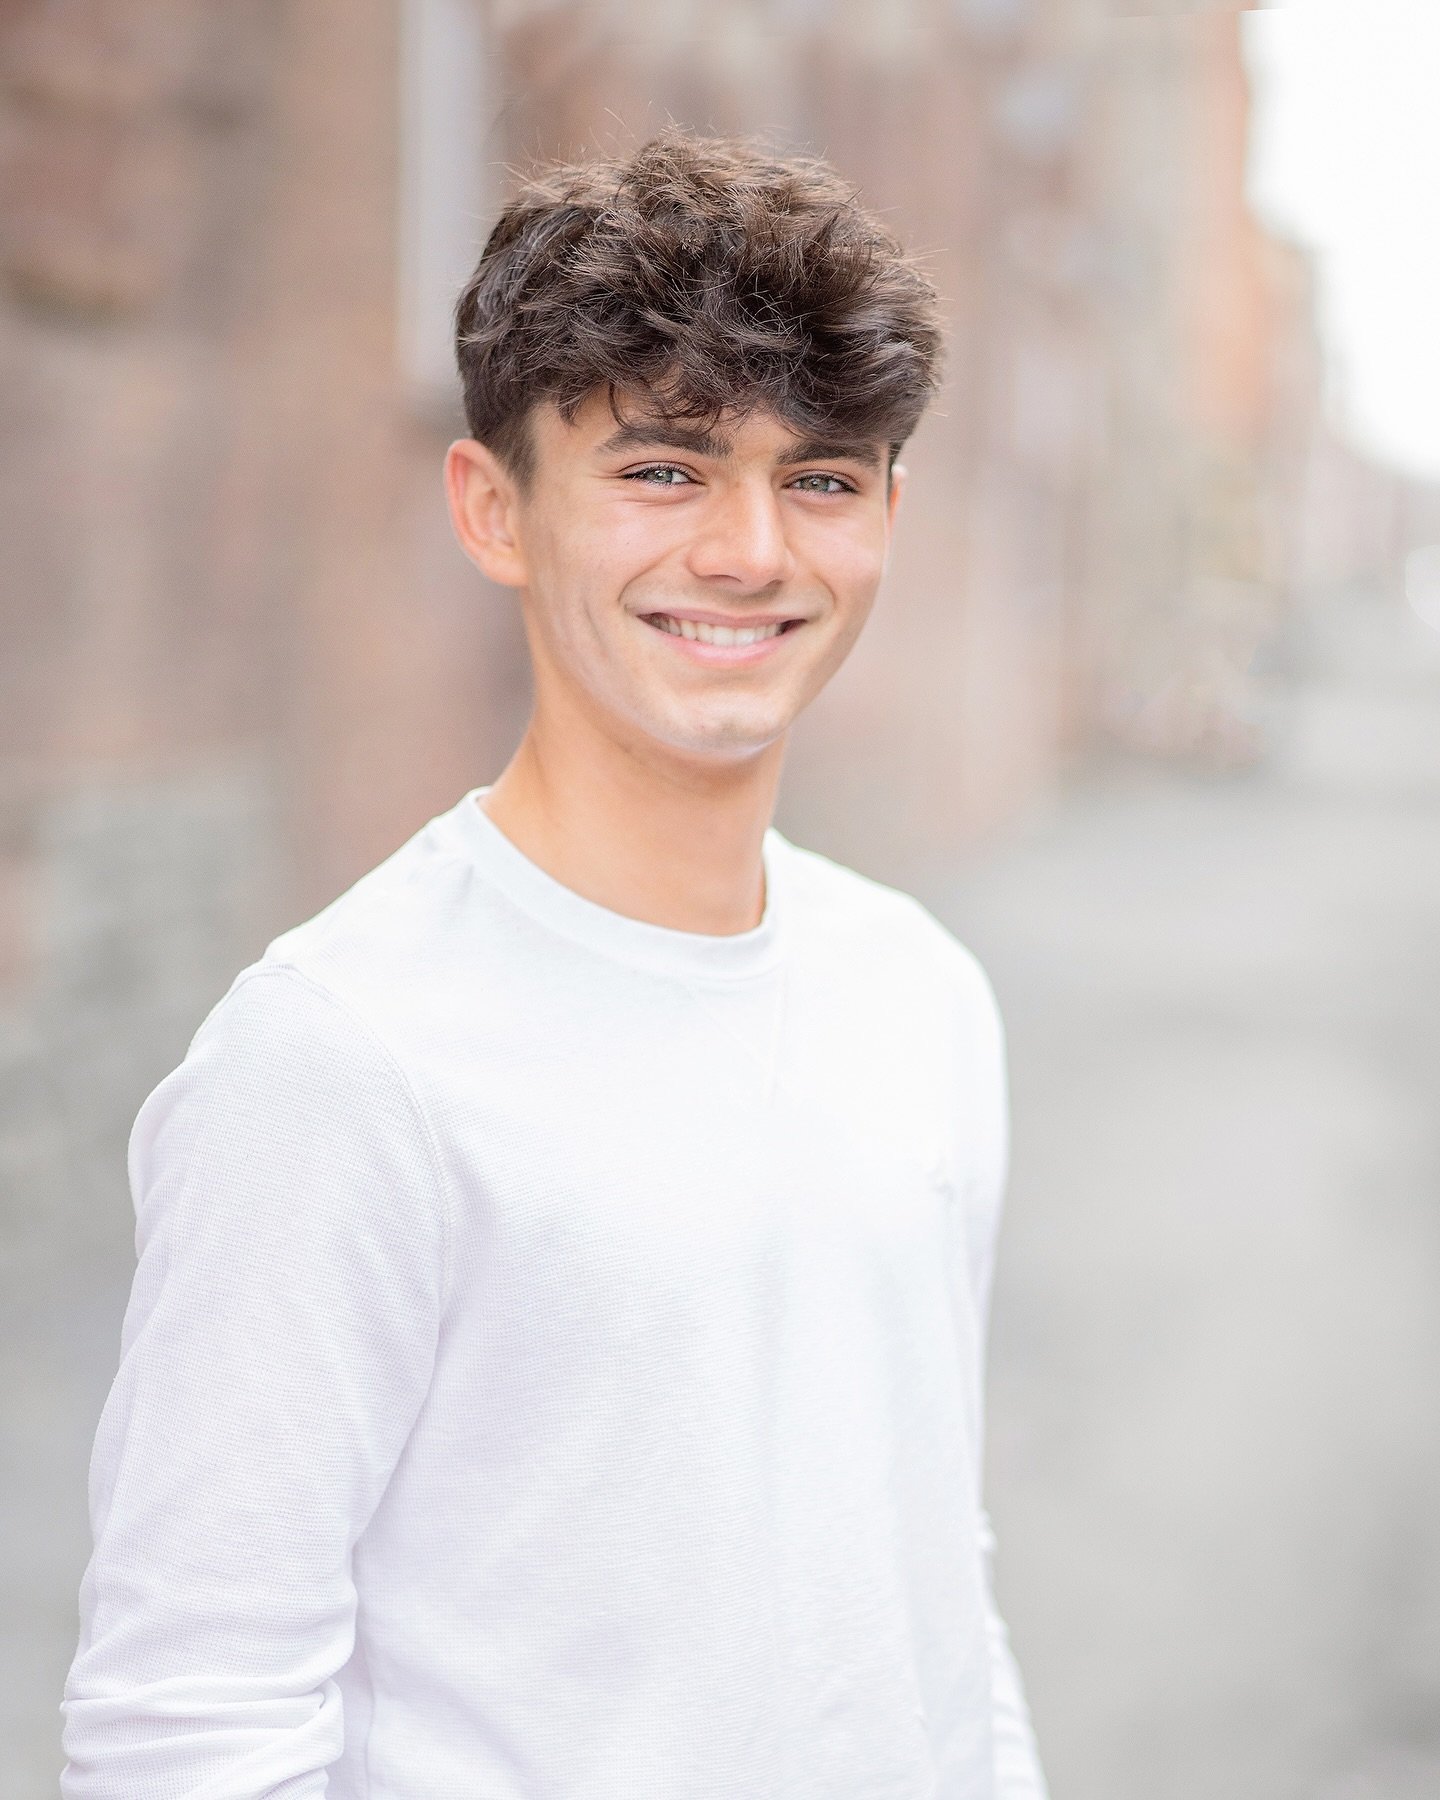 It was model headshot day for this high school sophomore. Can&rsquo;t wait to see where he goes with it!  #headshots #modeling #troy #albanyheadshots #model #sophmore #highschool #highschoolmodel